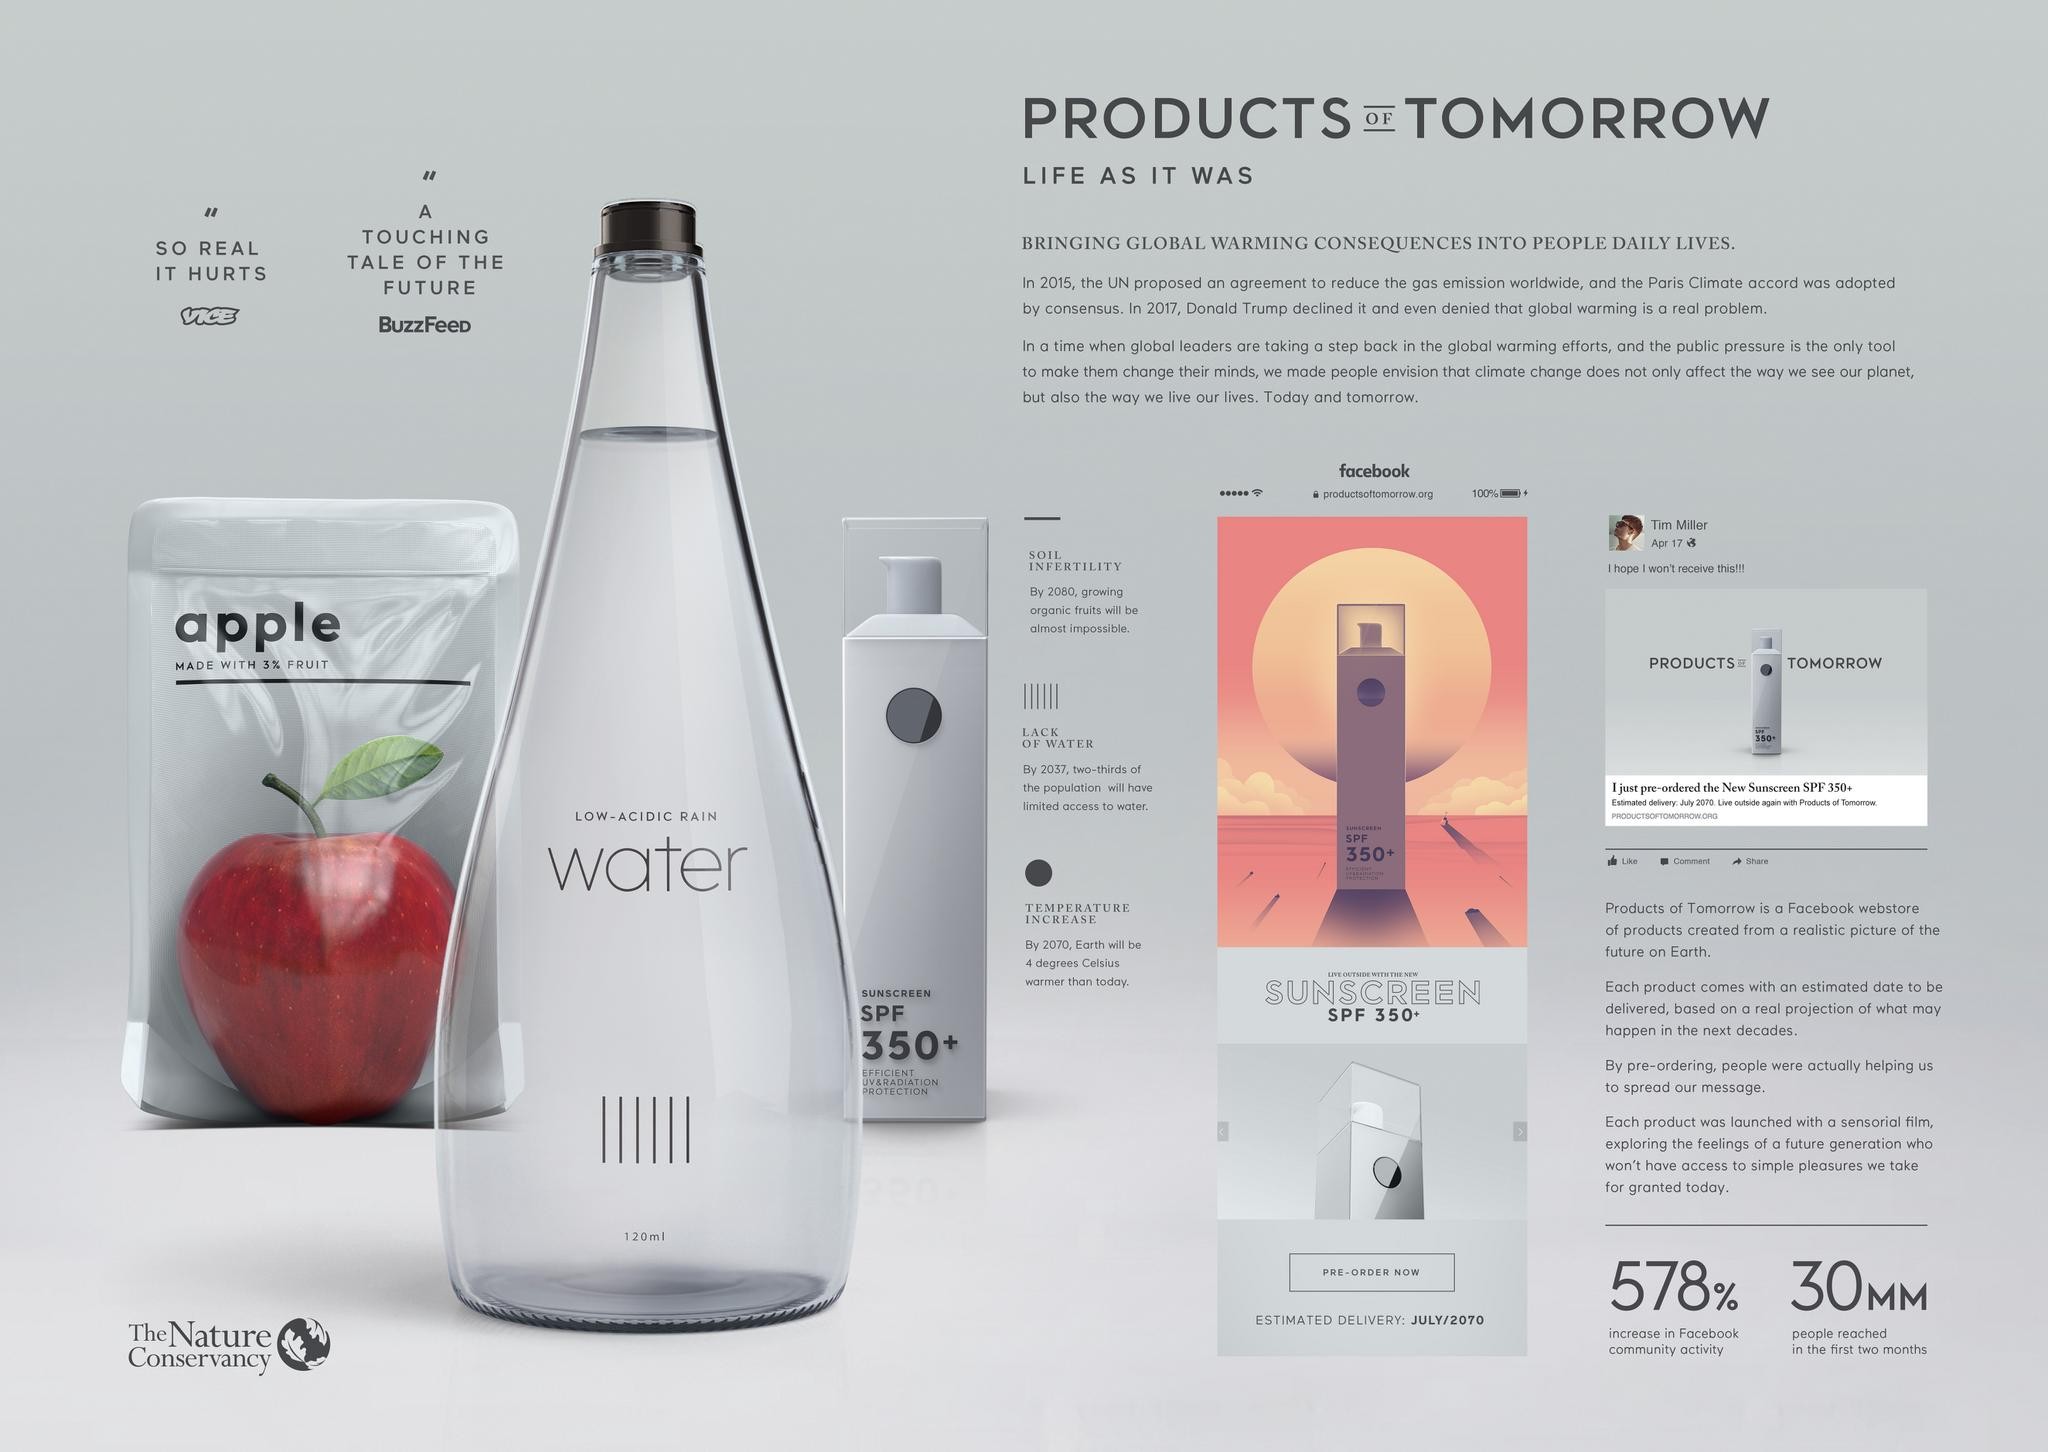 Products of Tomorrow